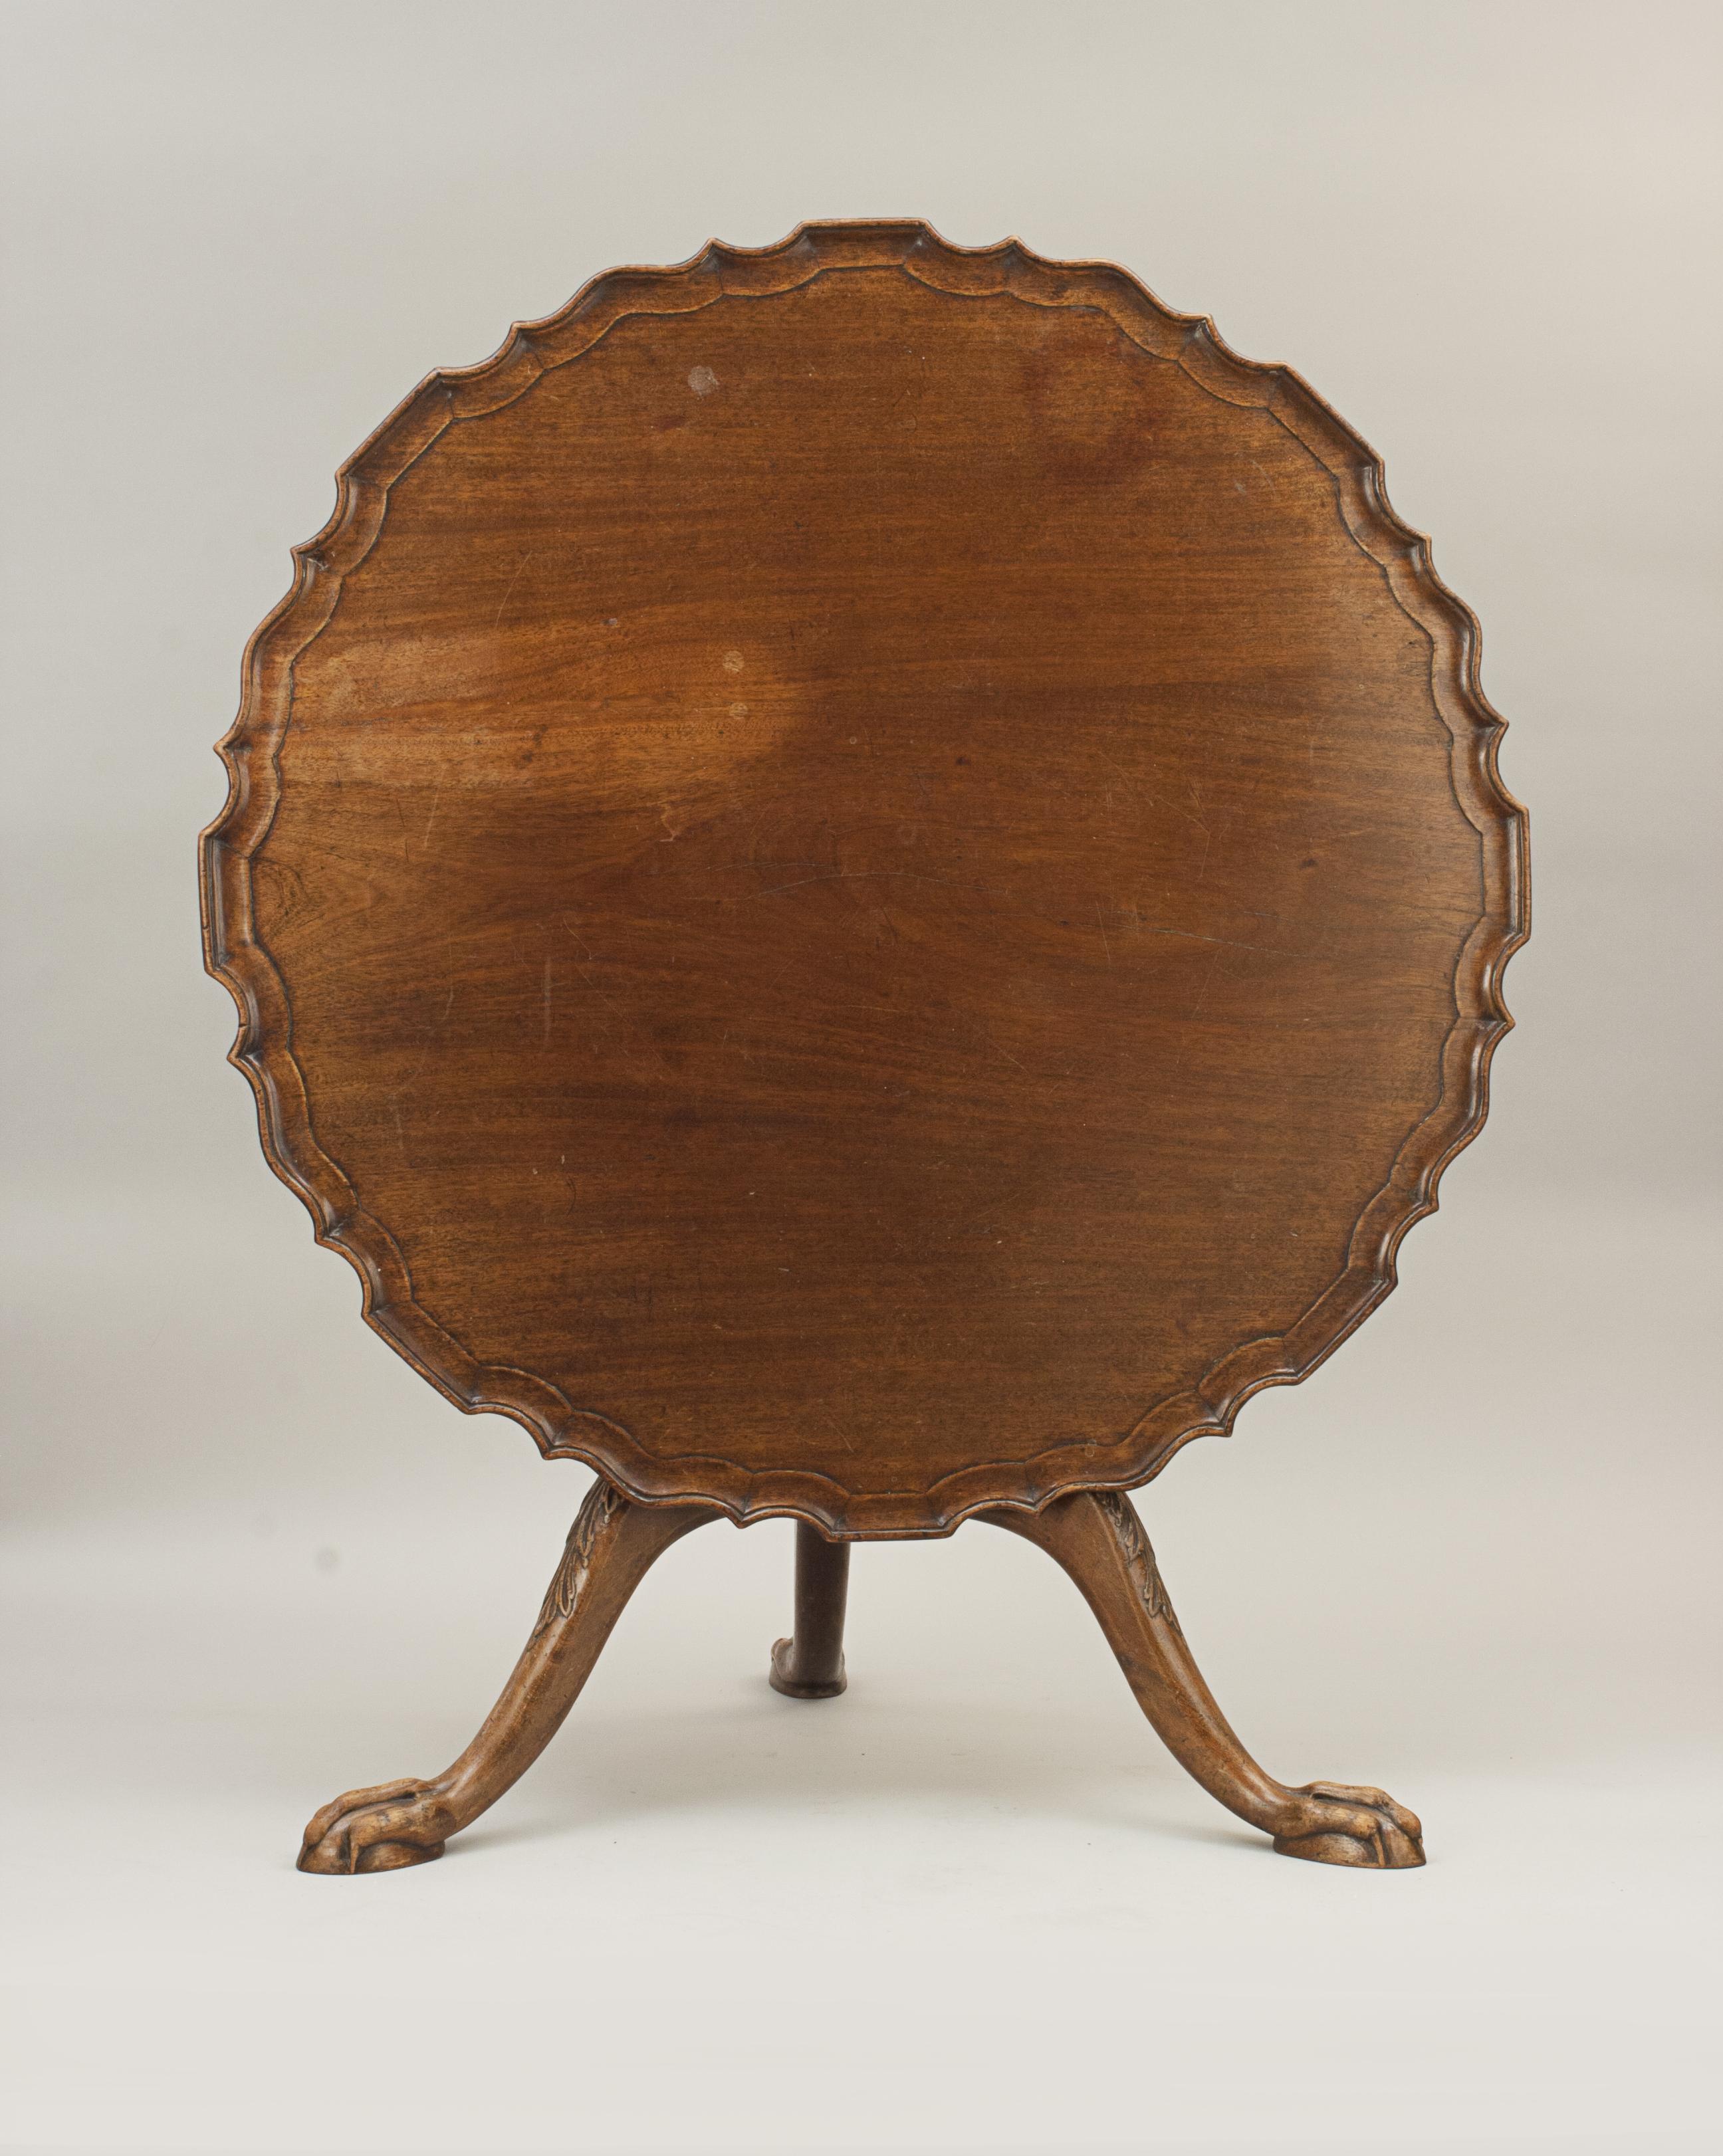 Mahogany Coffee, Pie Crust Tripod Table with Tilt-Top Action 1